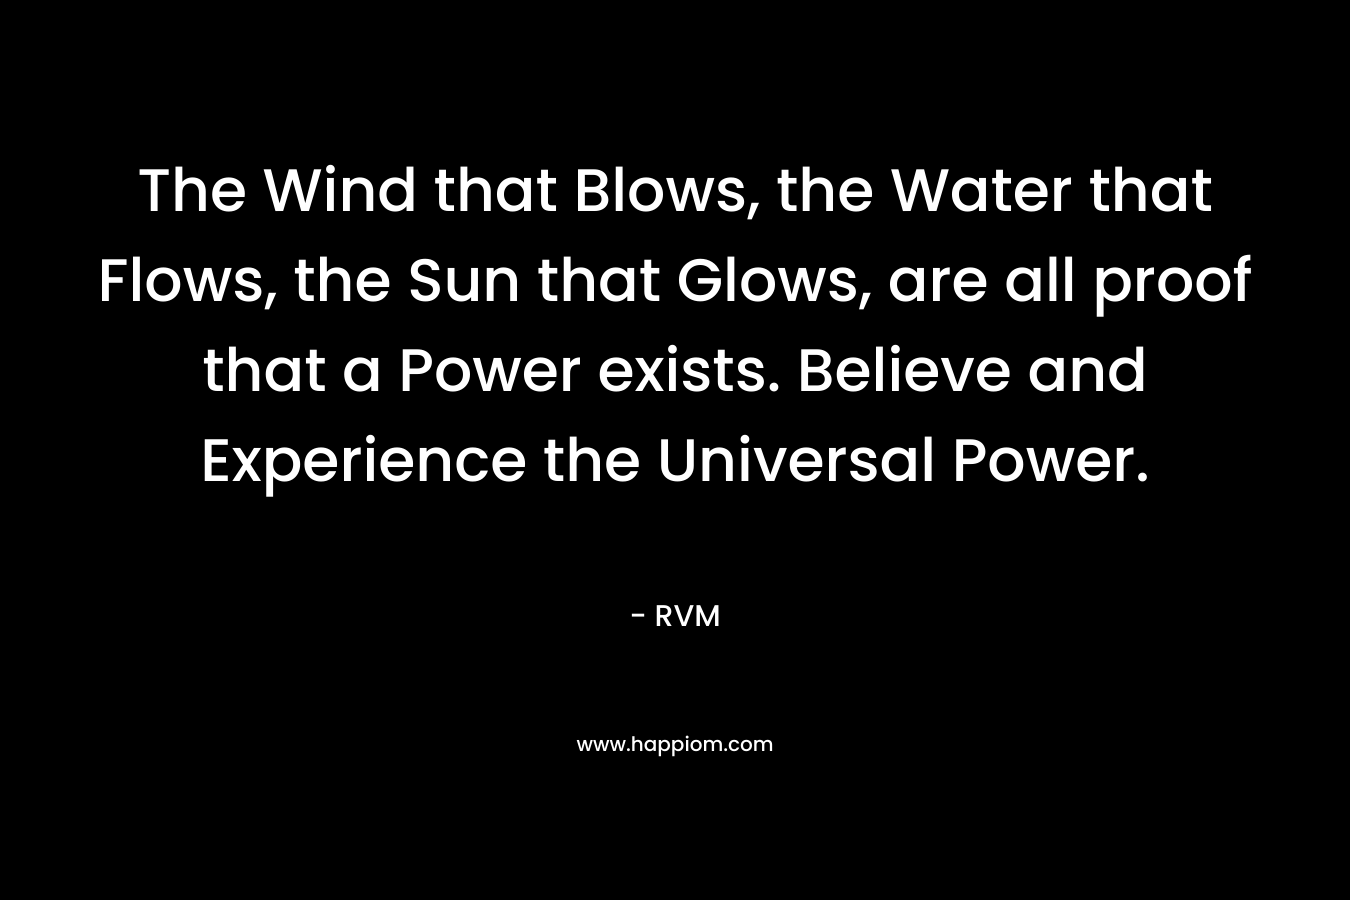 The Wind that Blows, the Water that Flows, the Sun that Glows, are all proof that a Power exists. Believe and Experience the Universal Power.